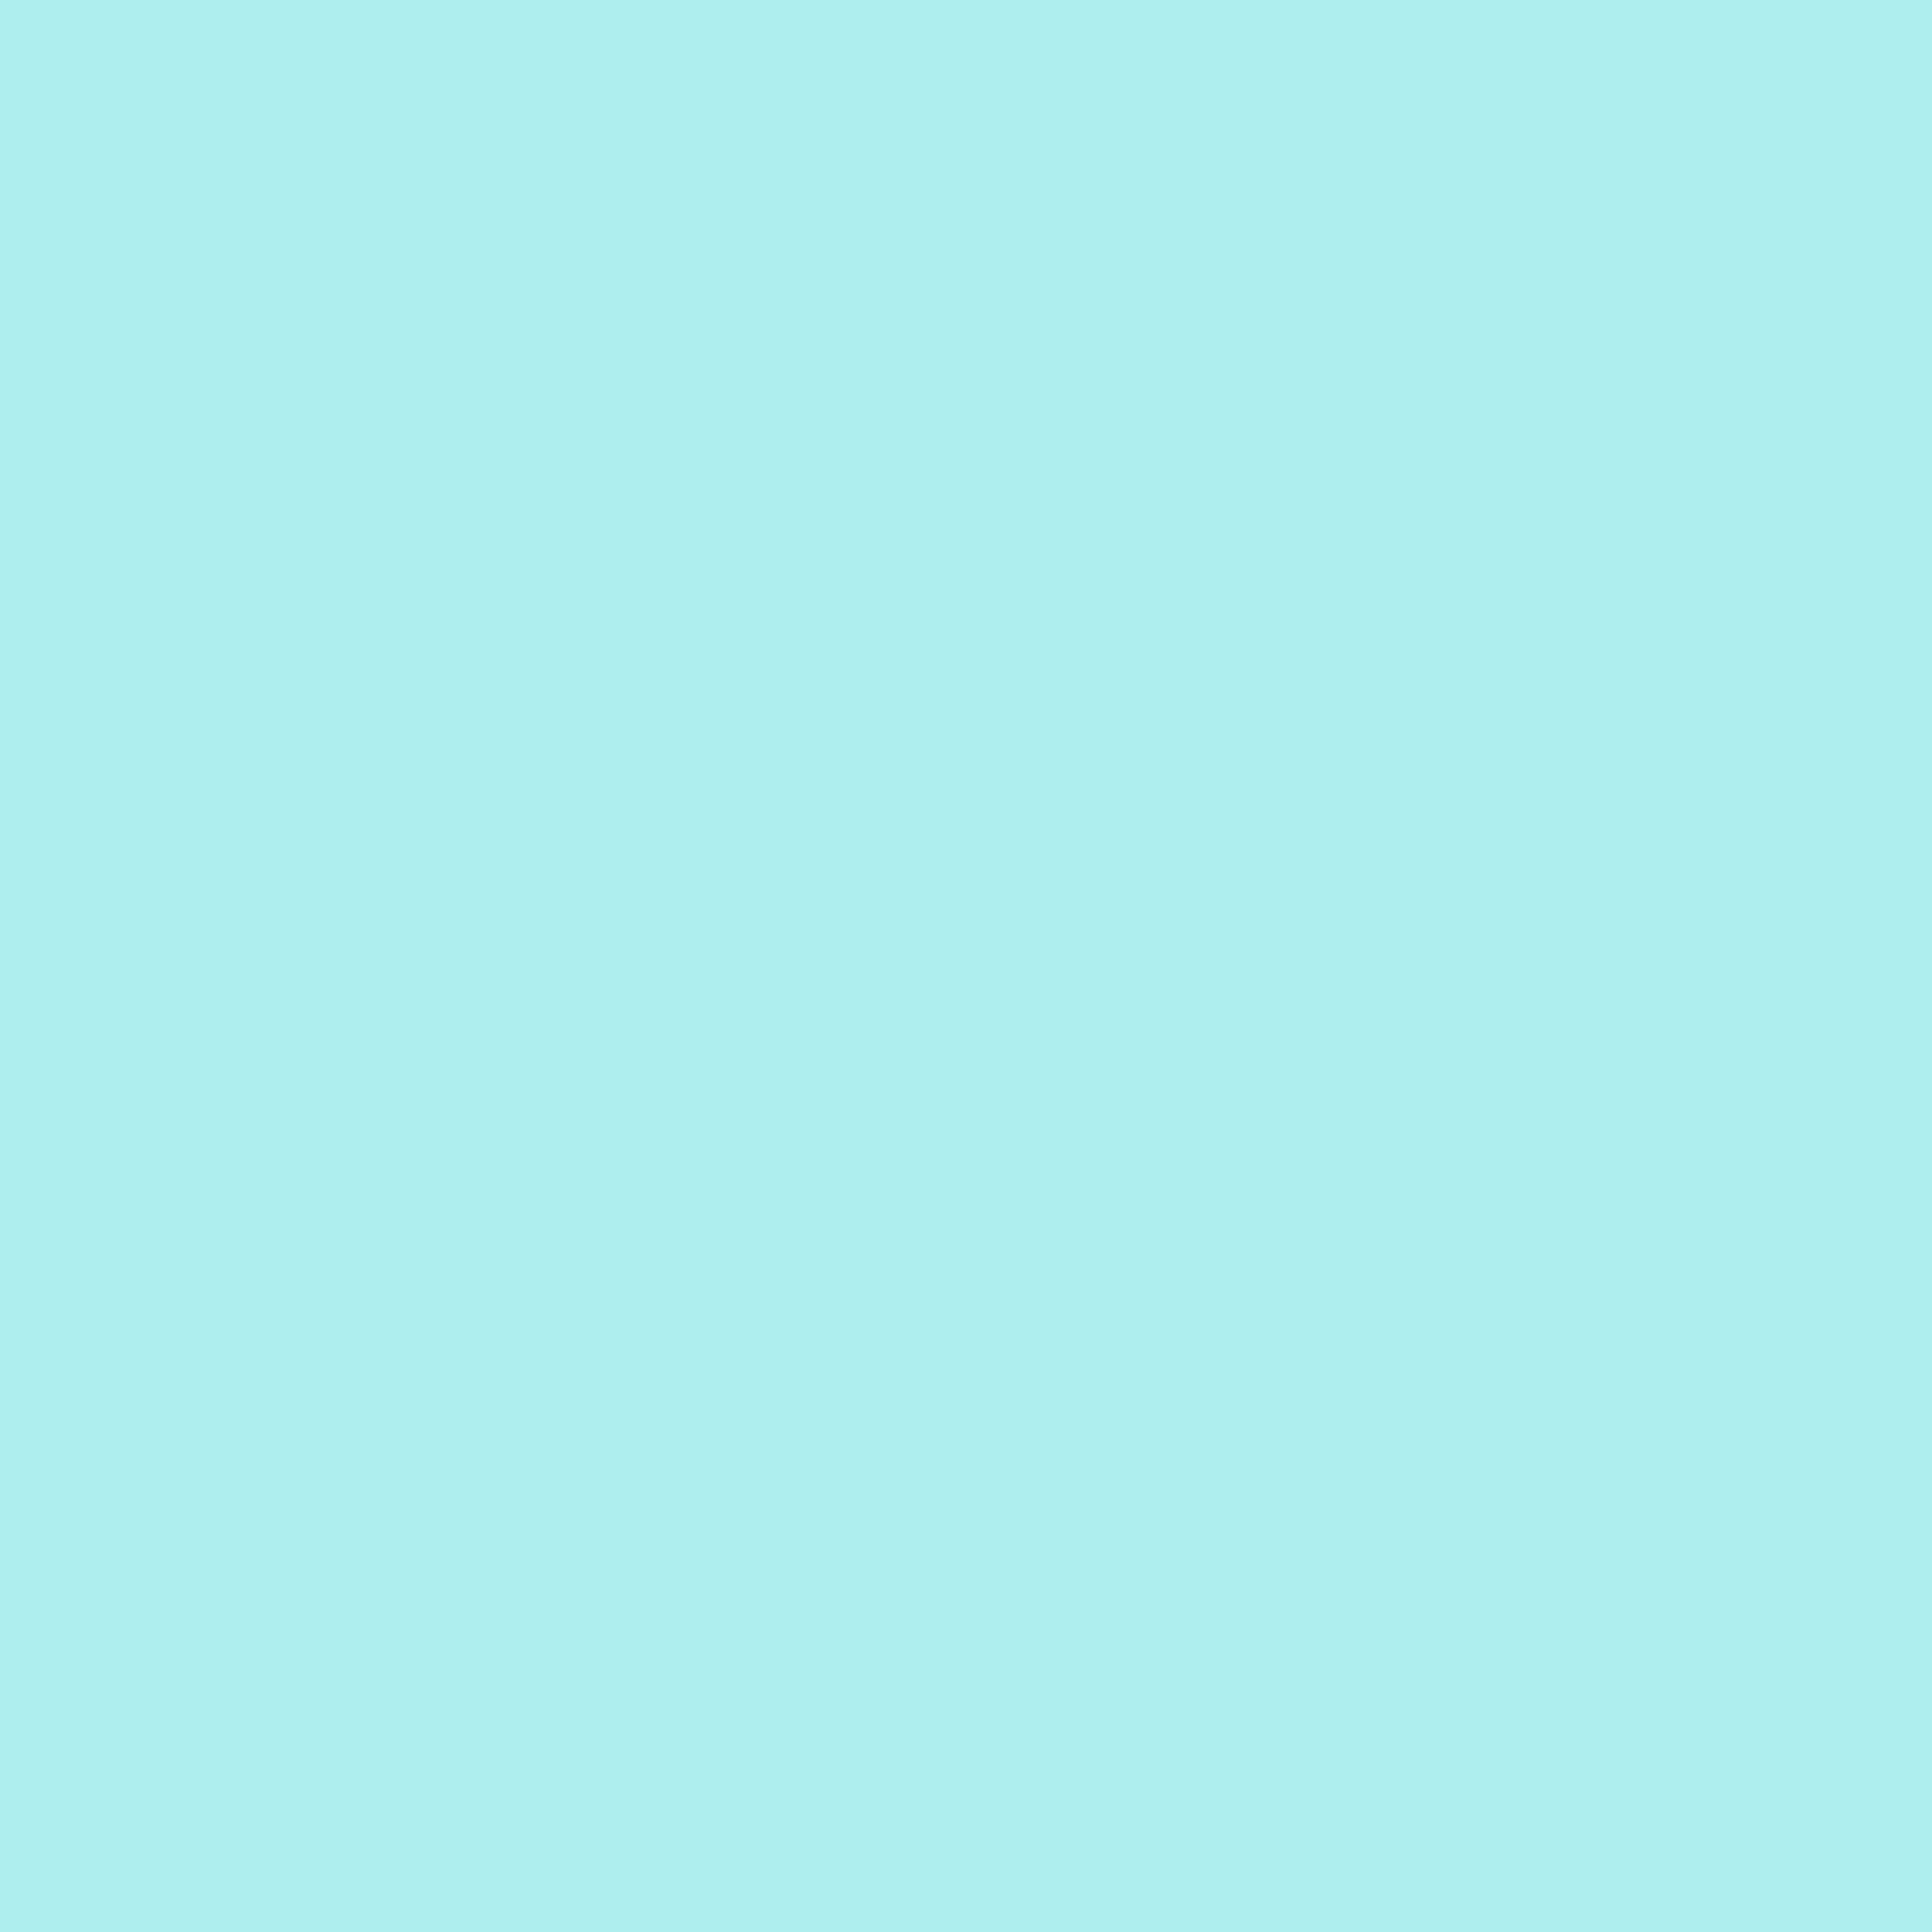 2048x2048 Pale Turquoise Solid Color Background